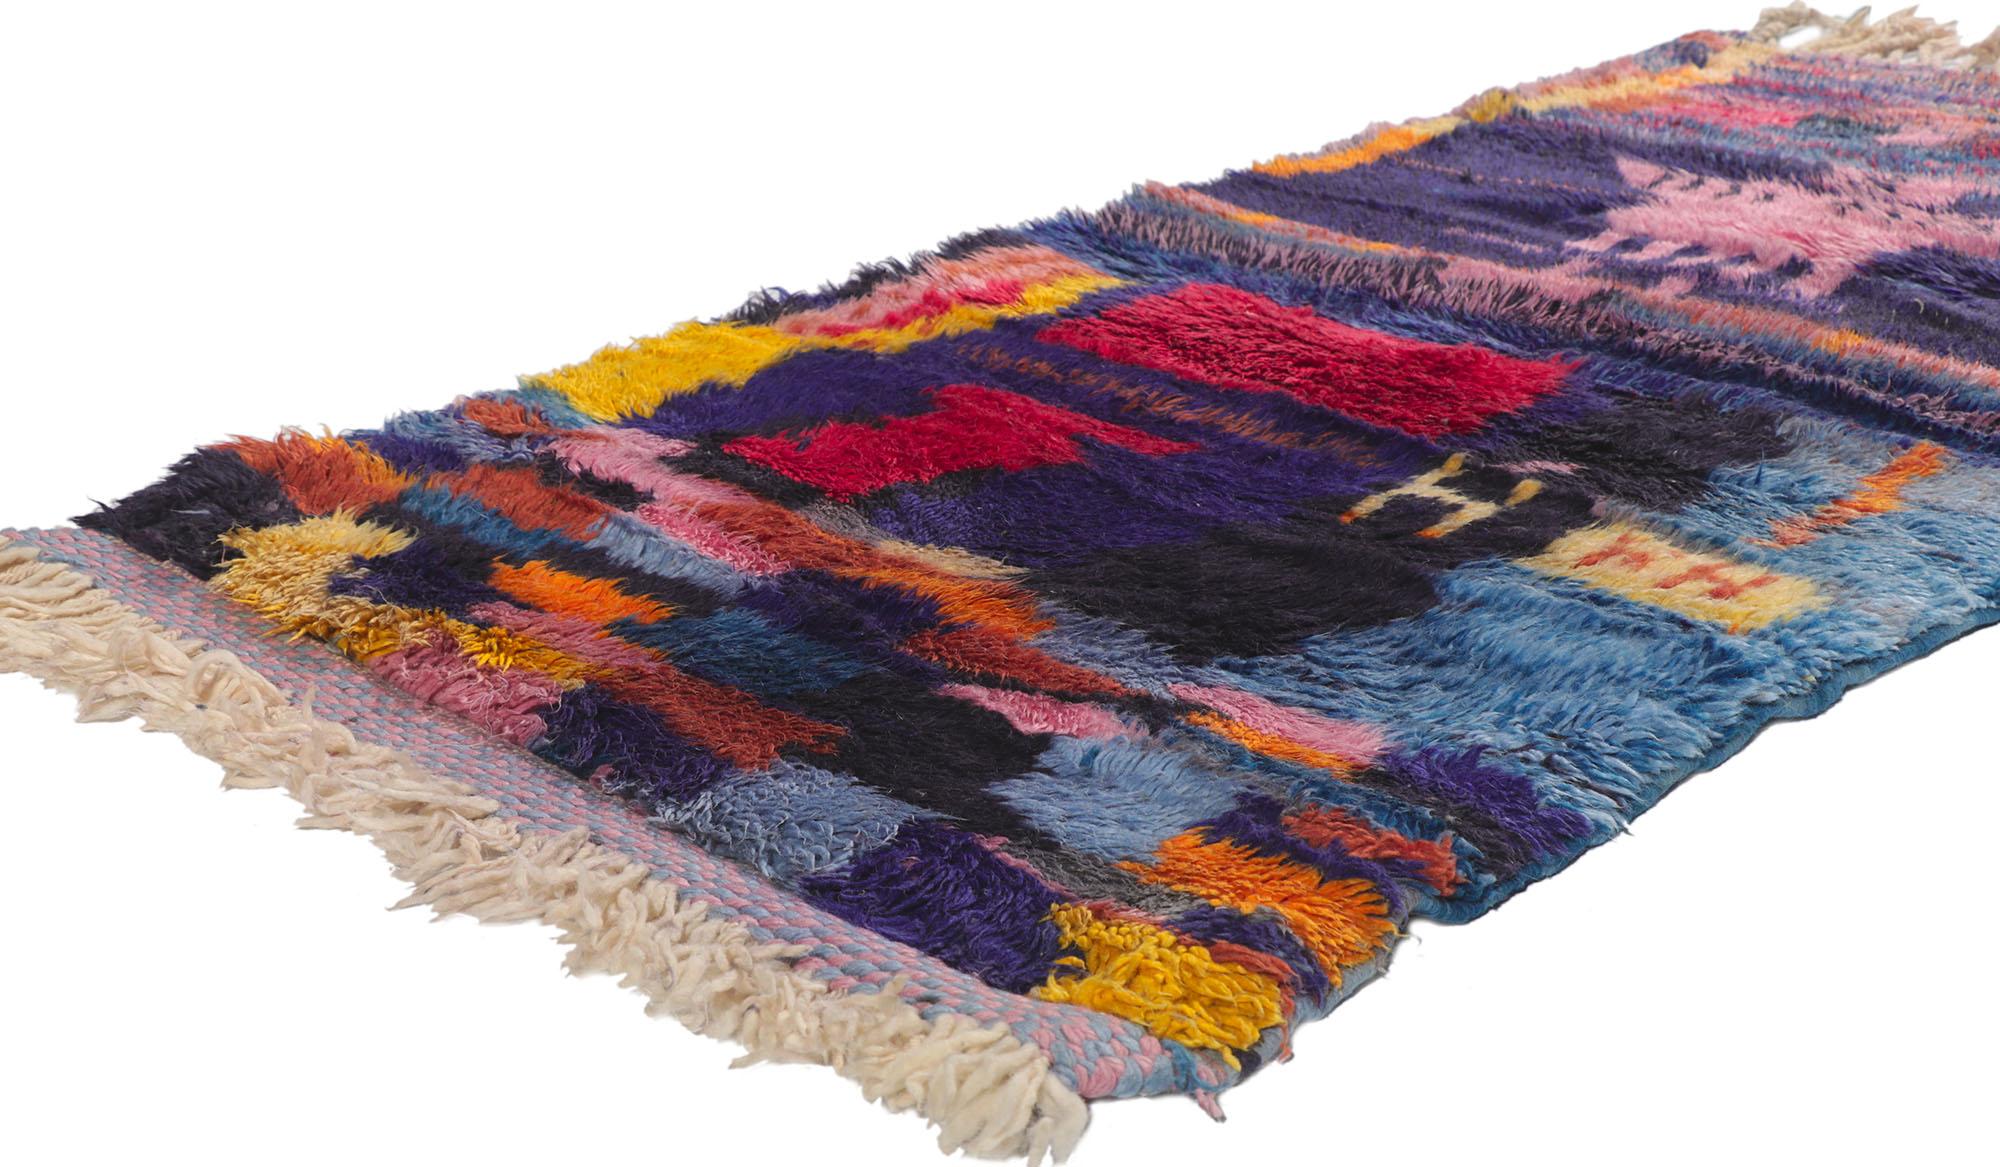 ​21113 New Contemporary Berber Moroccan Rug 02'07 x 05'07. ​Showcasing a bold expressive design, incredible detail and texture, this hand knotted wool contemporary Berber Moroccan rug is a captivating vision of woven beauty. The bold geometric